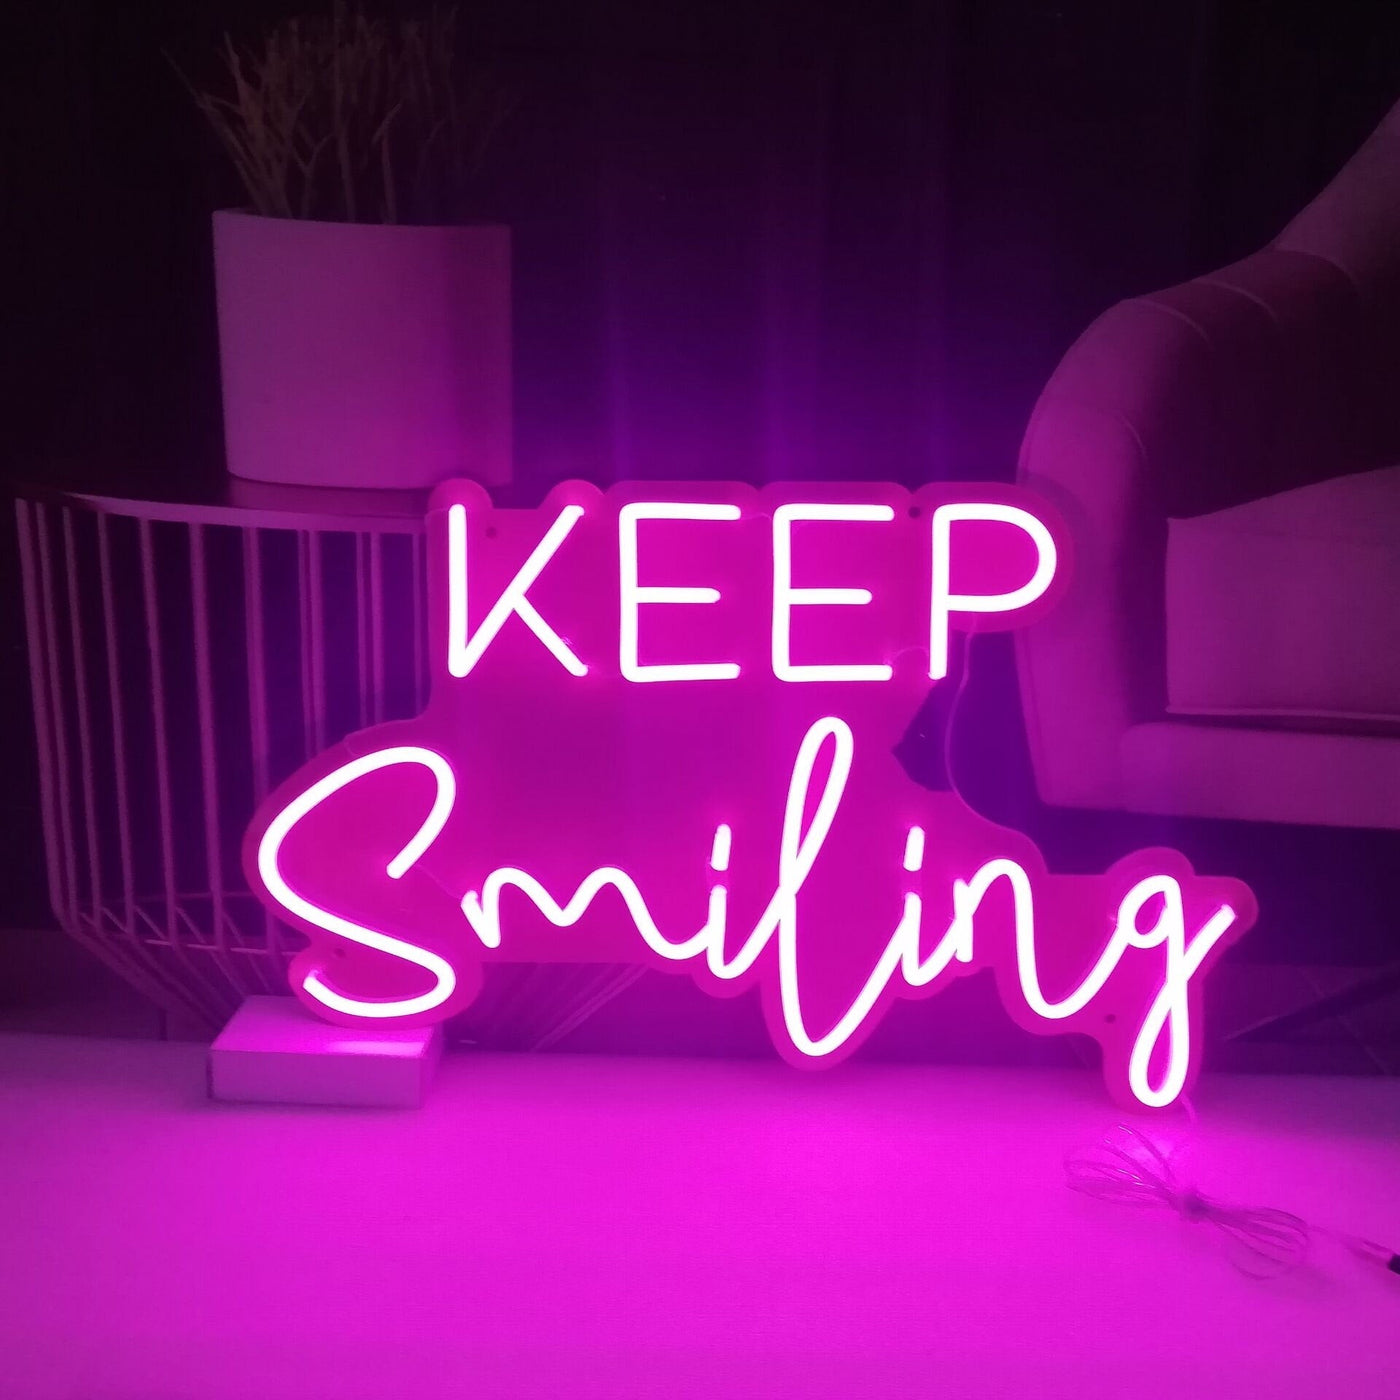 KEEP Smiling Neon Signs Led Neon Light Wall Hanging Sign